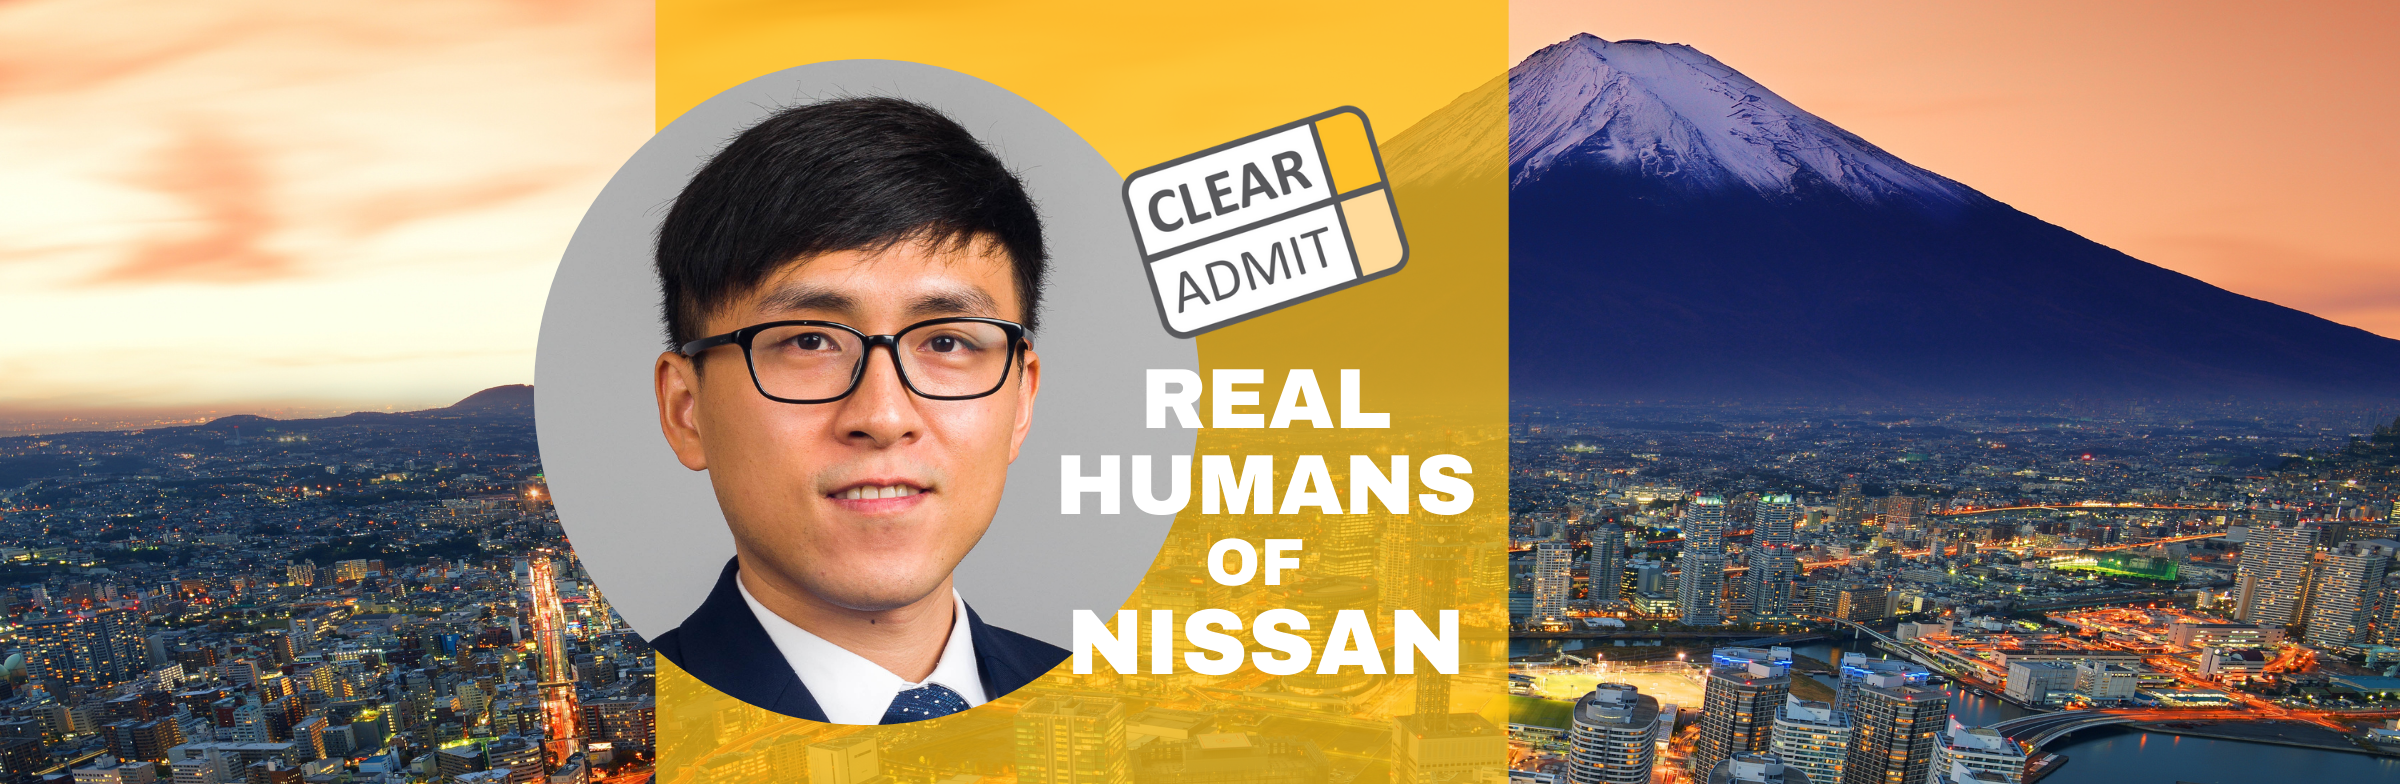 Image for Real Humans of Nissan Motor Corporation: Ruiyi Chen, Duke Fuqua ’19, Product Strategist